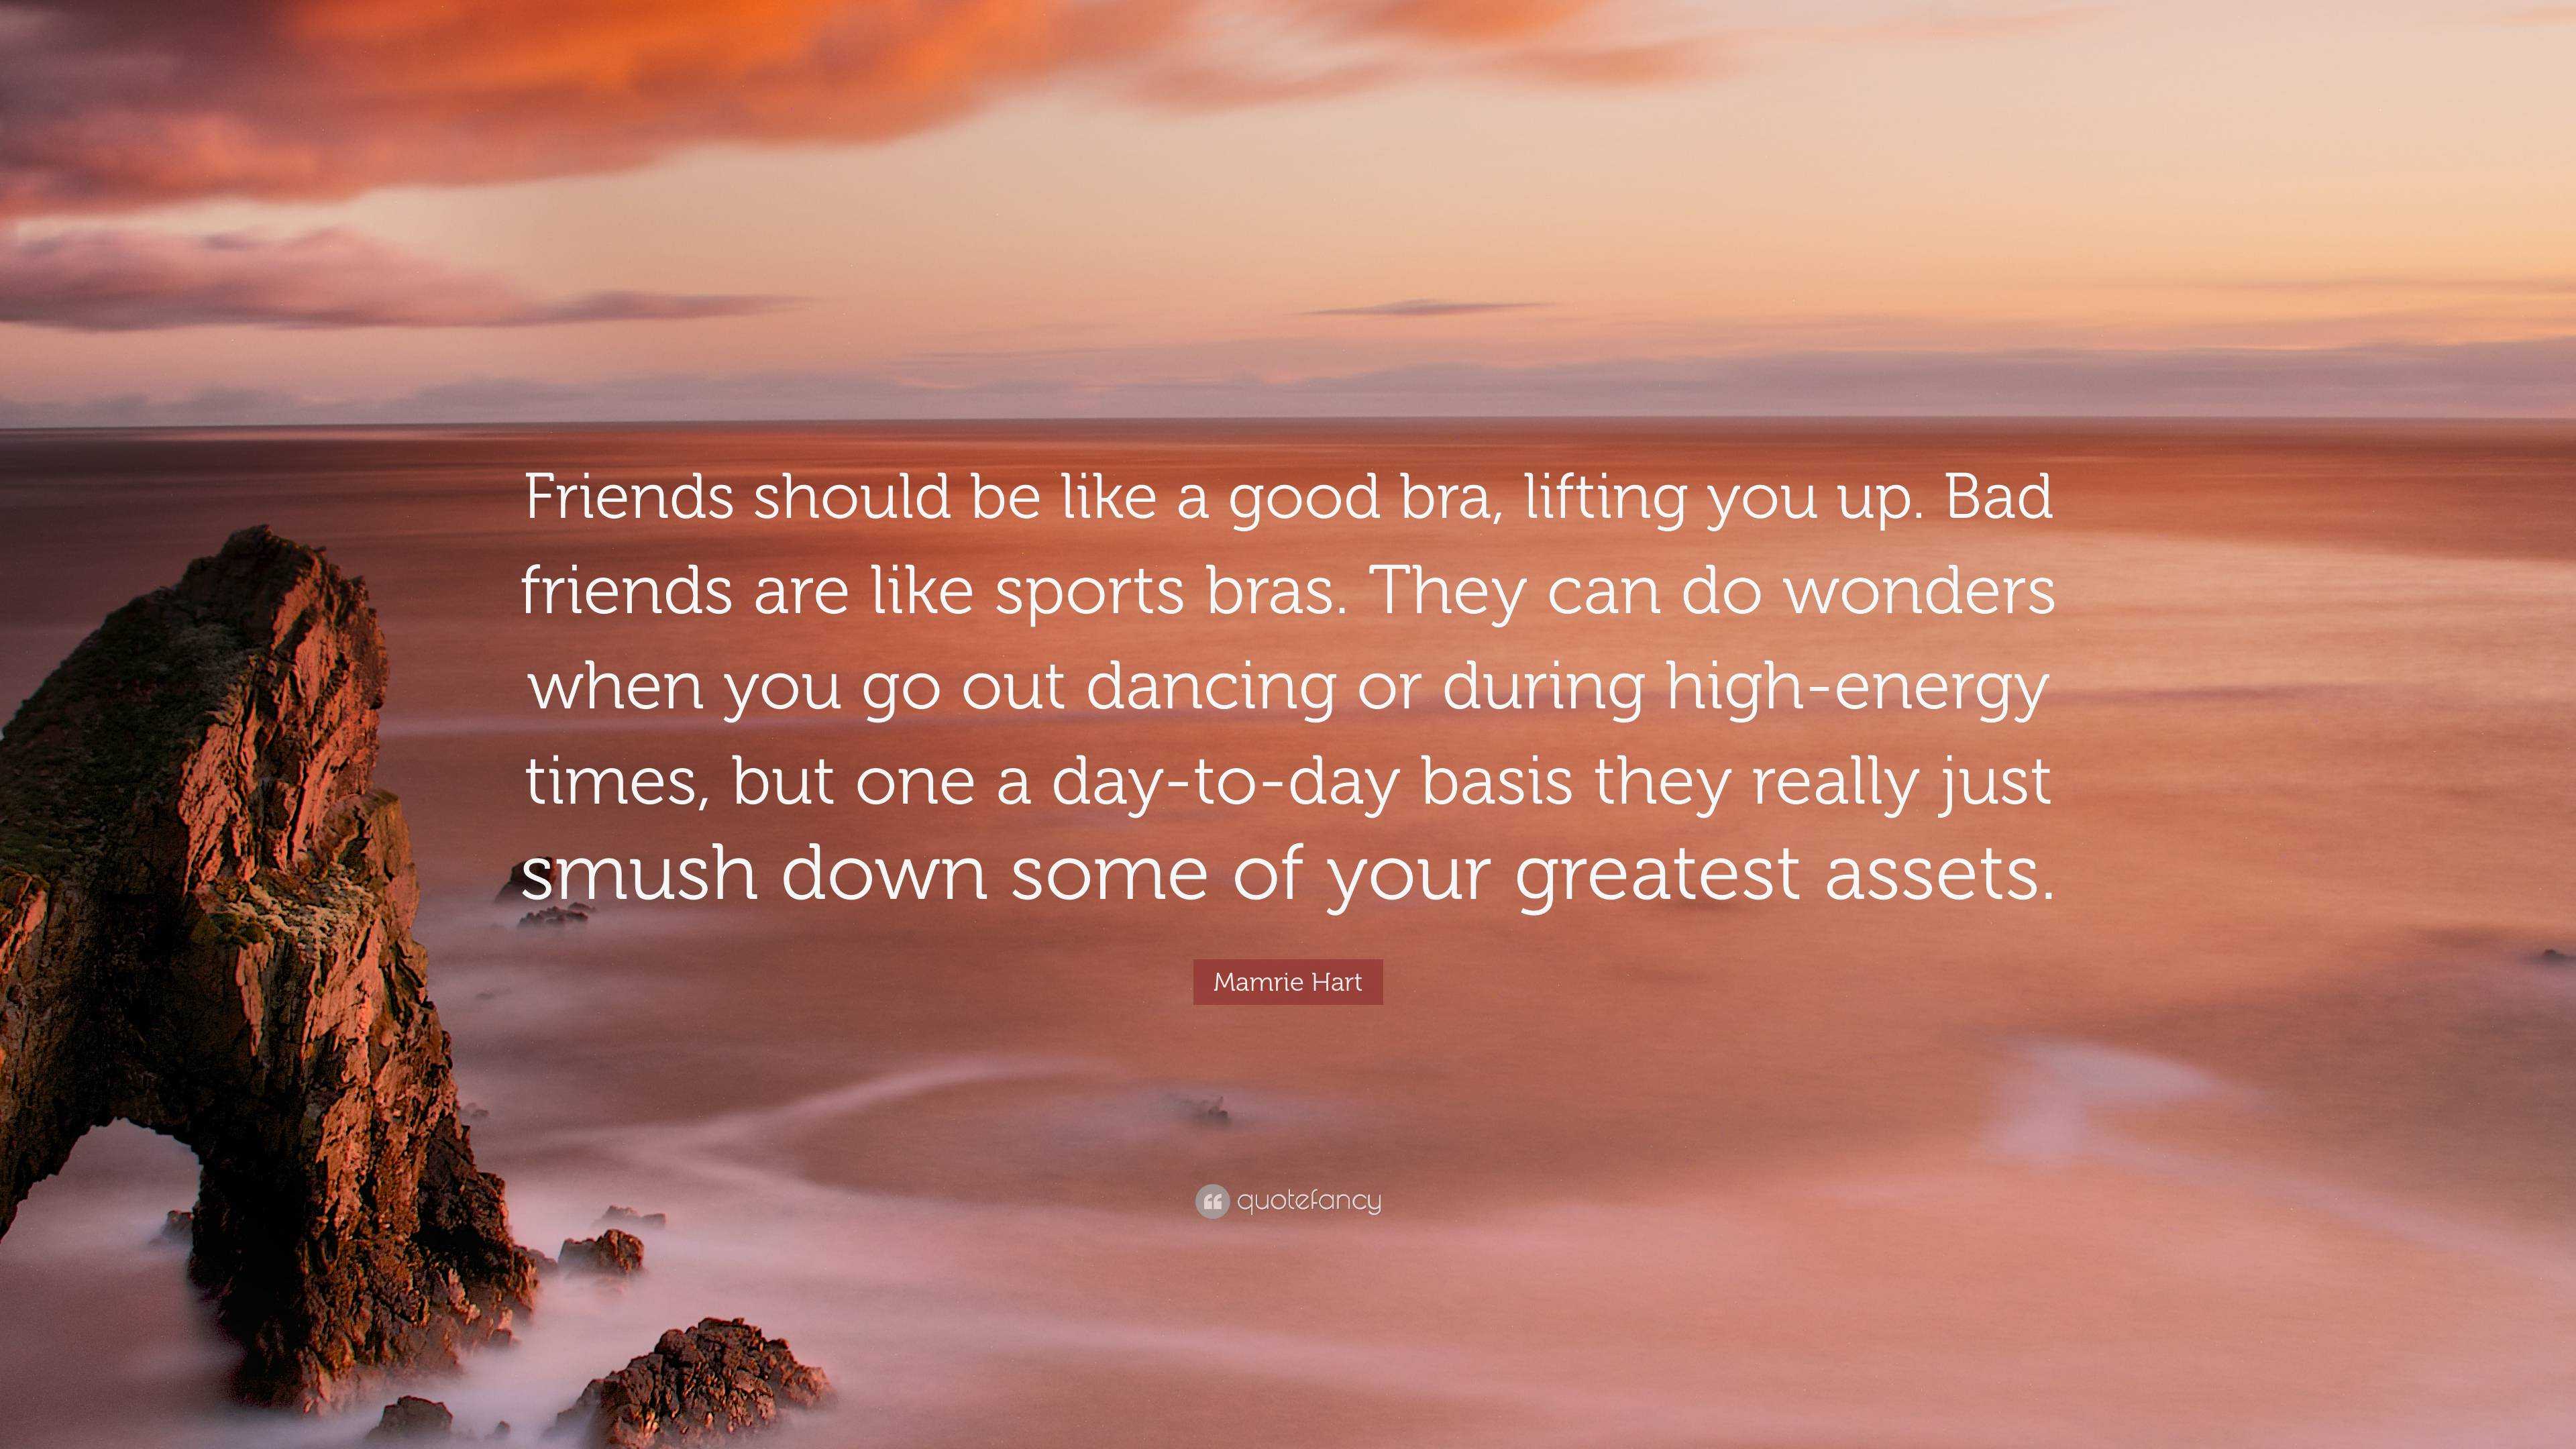 https://quotefancy.com/media/wallpaper/3840x2160/6457363-Mamrie-Hart-Quote-Friends-should-be-like-a-good-bra-lifting-you-up.jpg